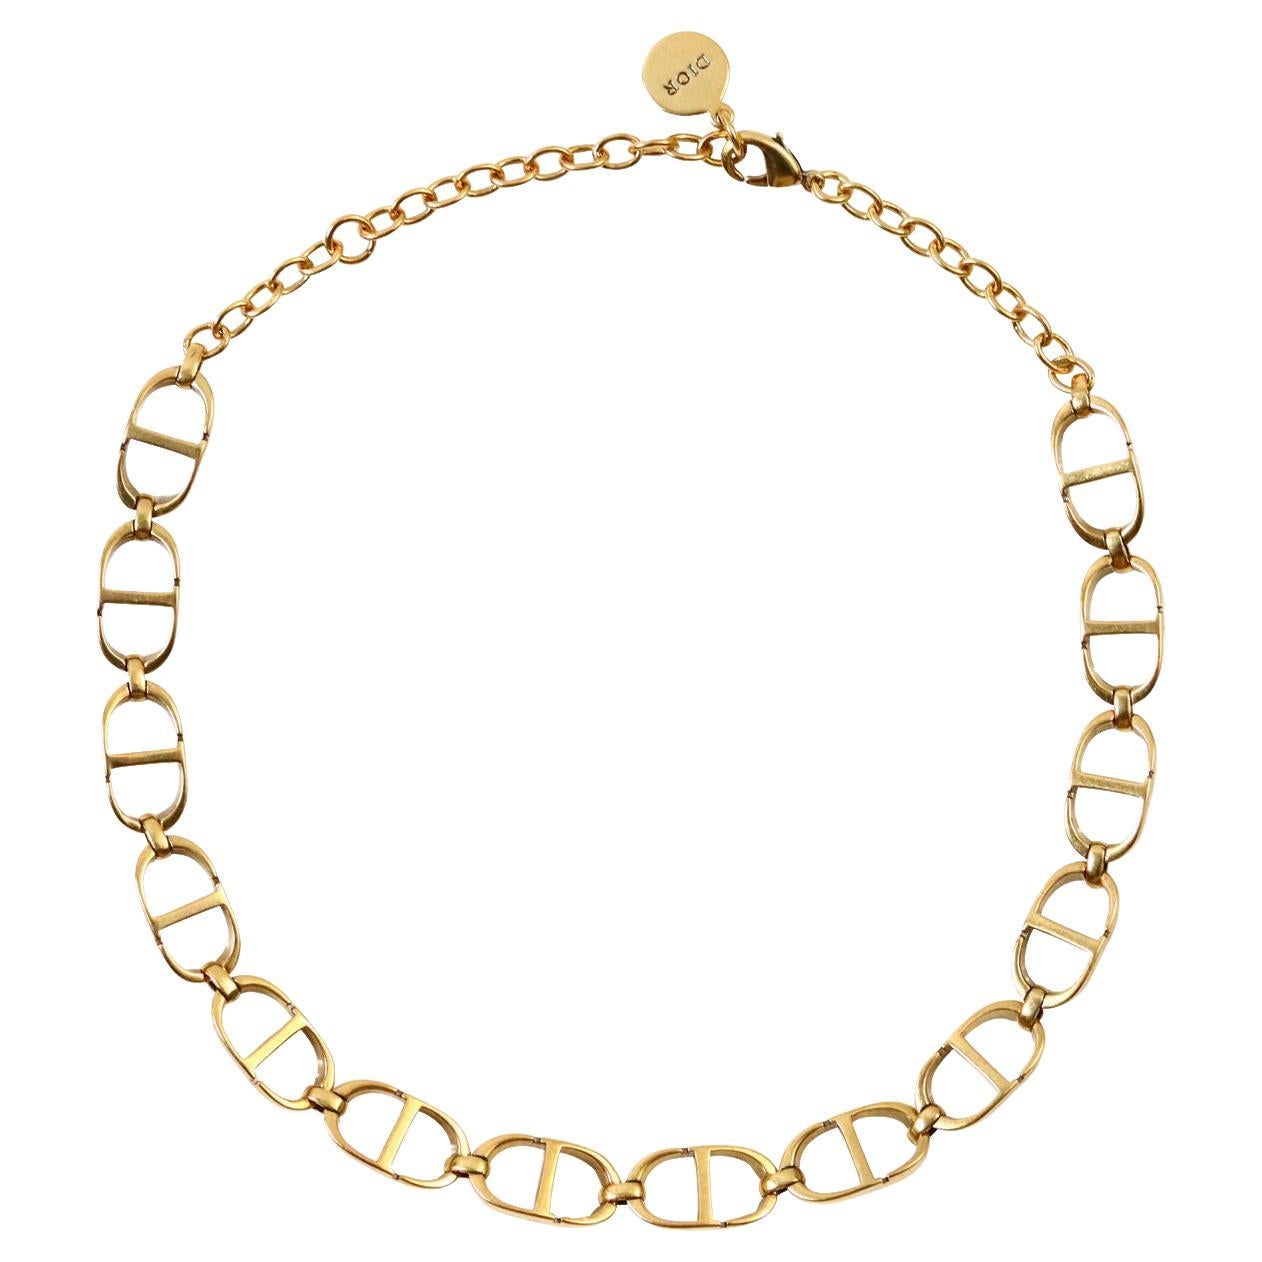 Vintage Dior Gold Tone CD Choker Circa 1990s. CD makes up a link which is then joined together link after link. Classic Piece.